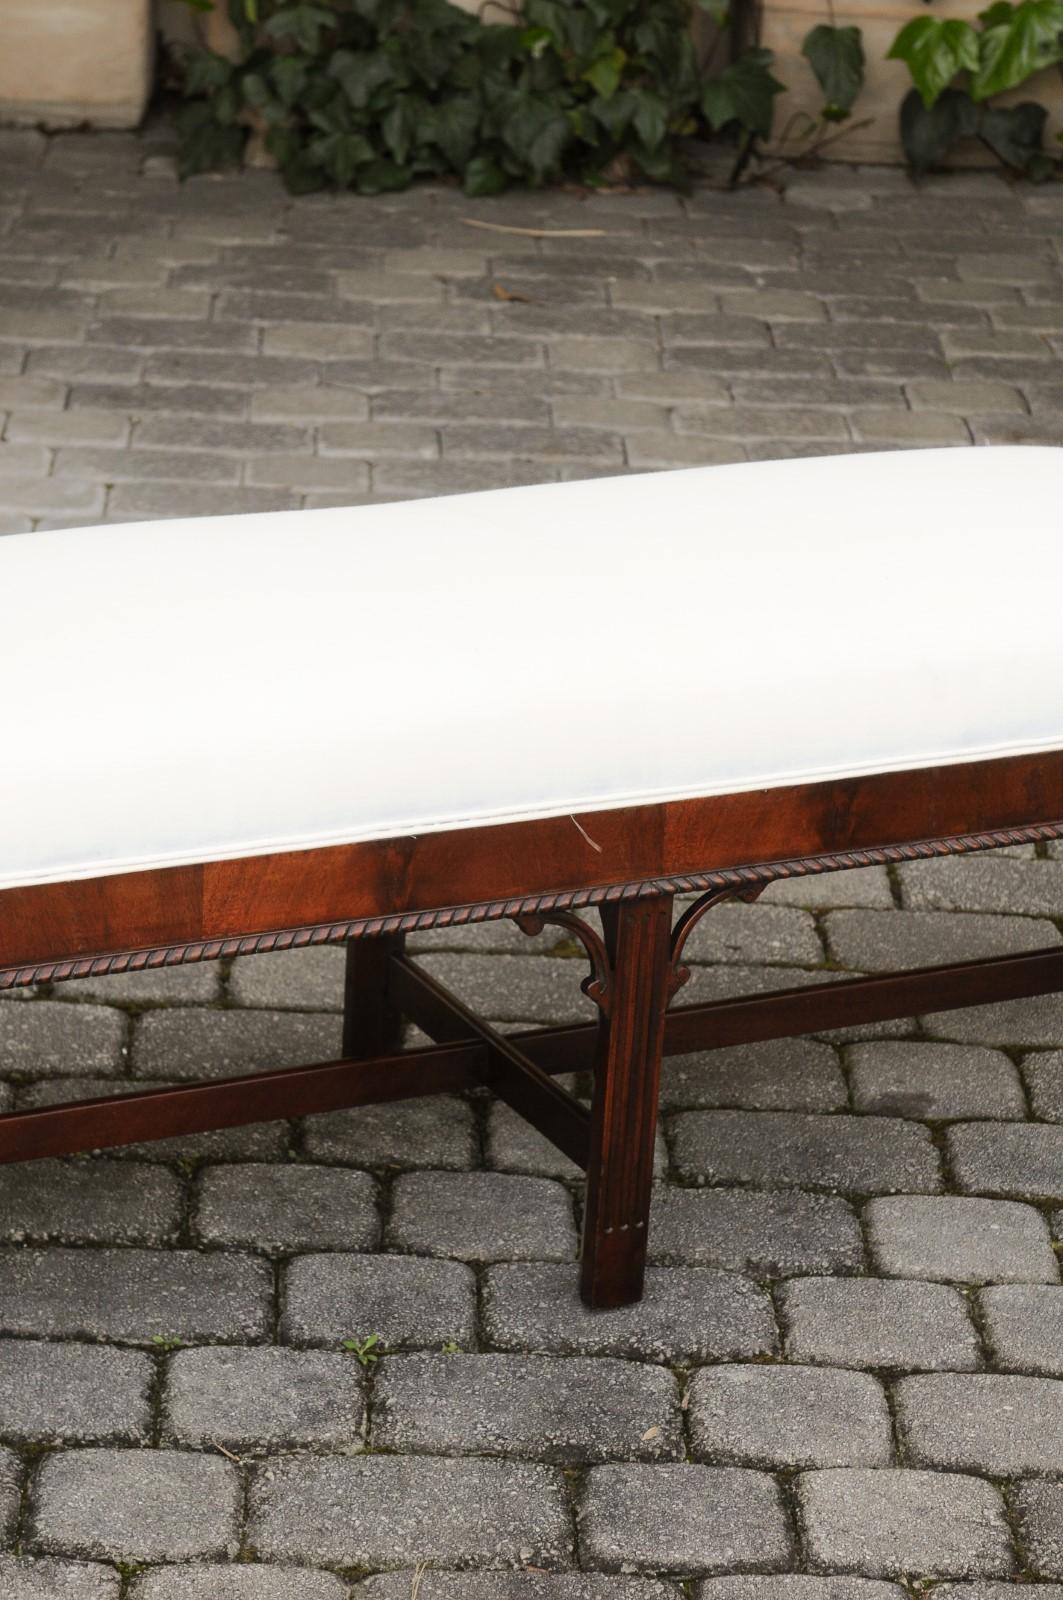 20th Century English 1920s Mahogany Upholstered Bench with Out-Scrolling Arms and Rosettes